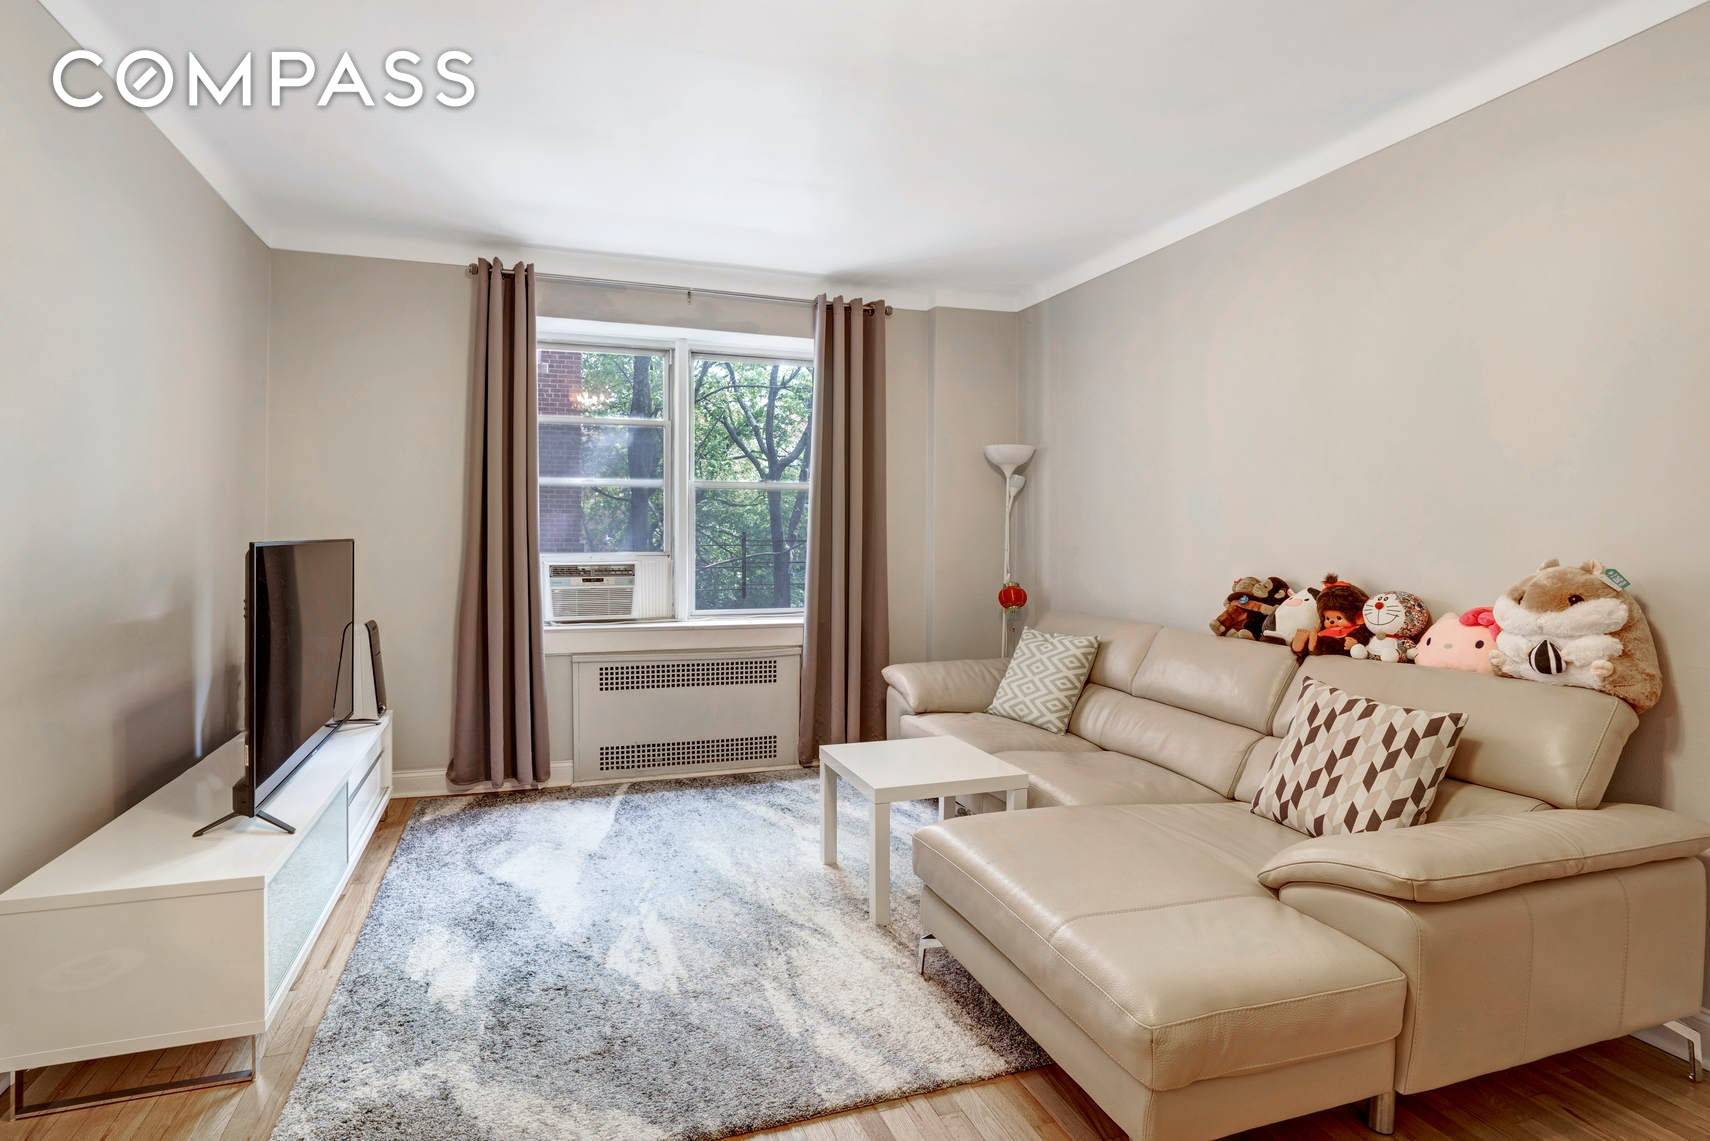 A beautifully renovated, move in ready one bedroom home.